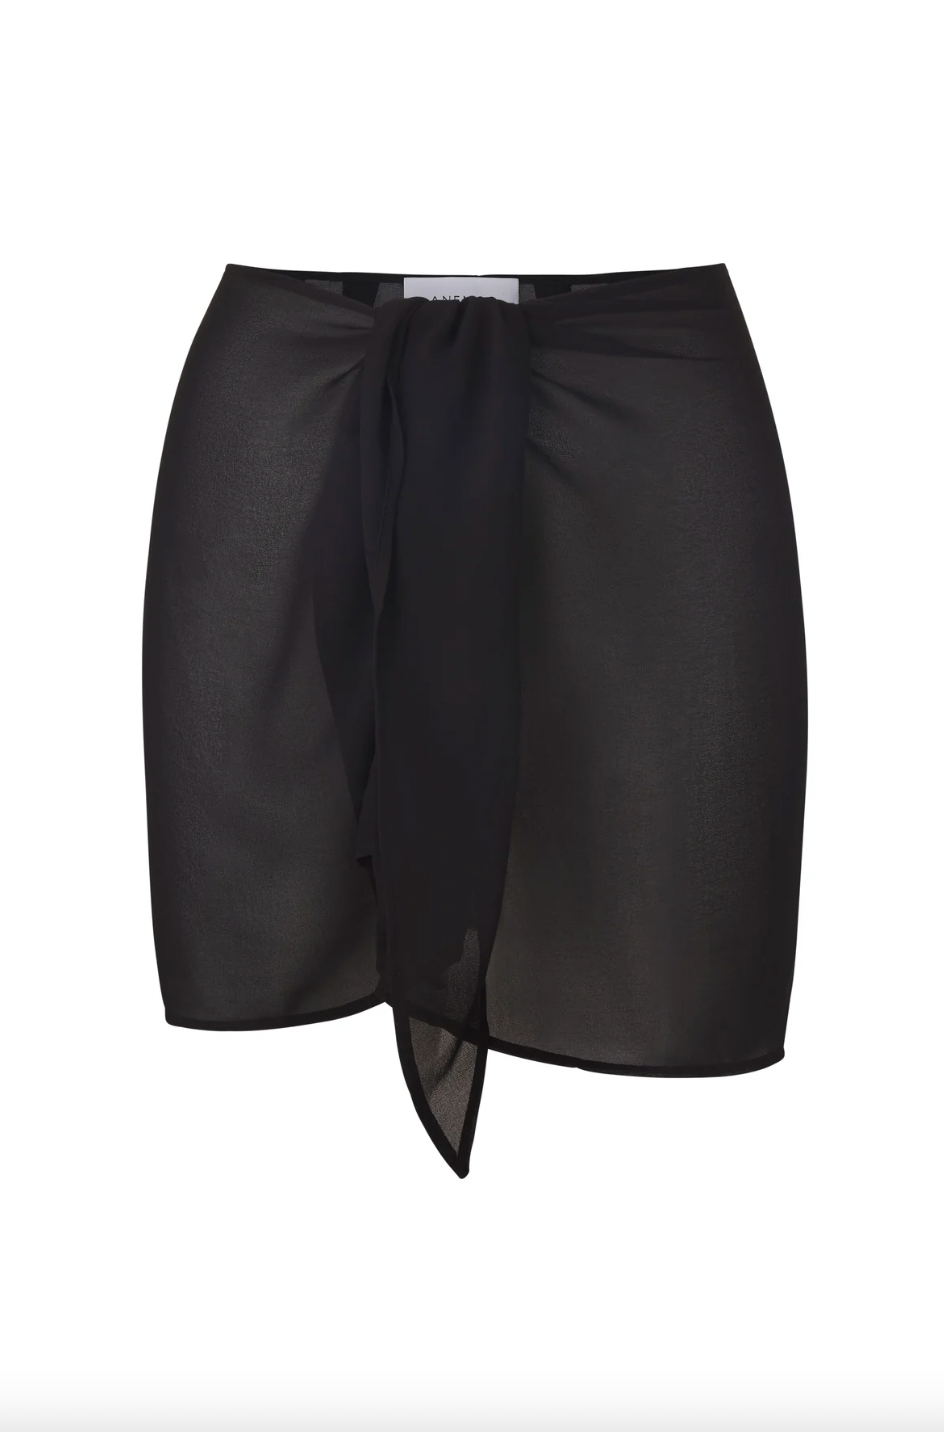 Product Image for The Wrap Mini Skirt Cover-Up, Black